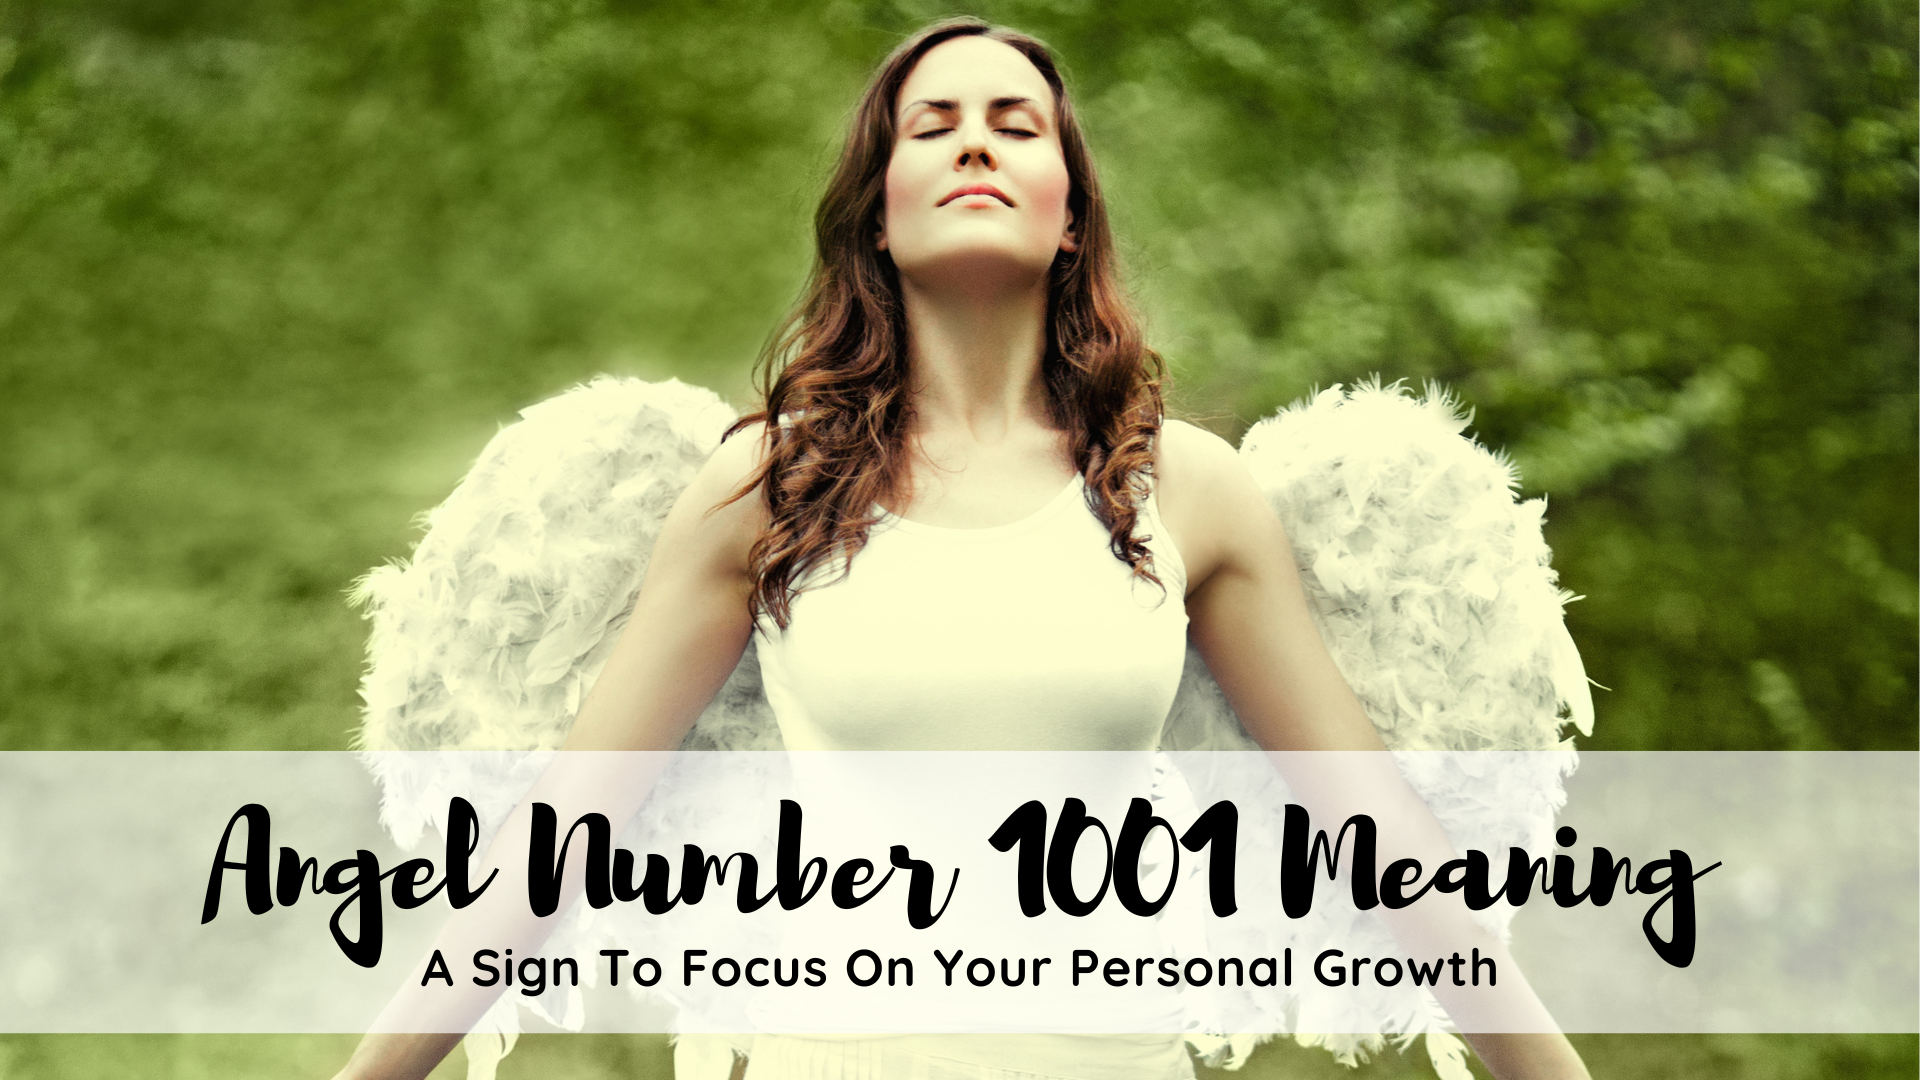 Angel Number 1001 Meaning - A Sign To Focus On Your Personal Growth